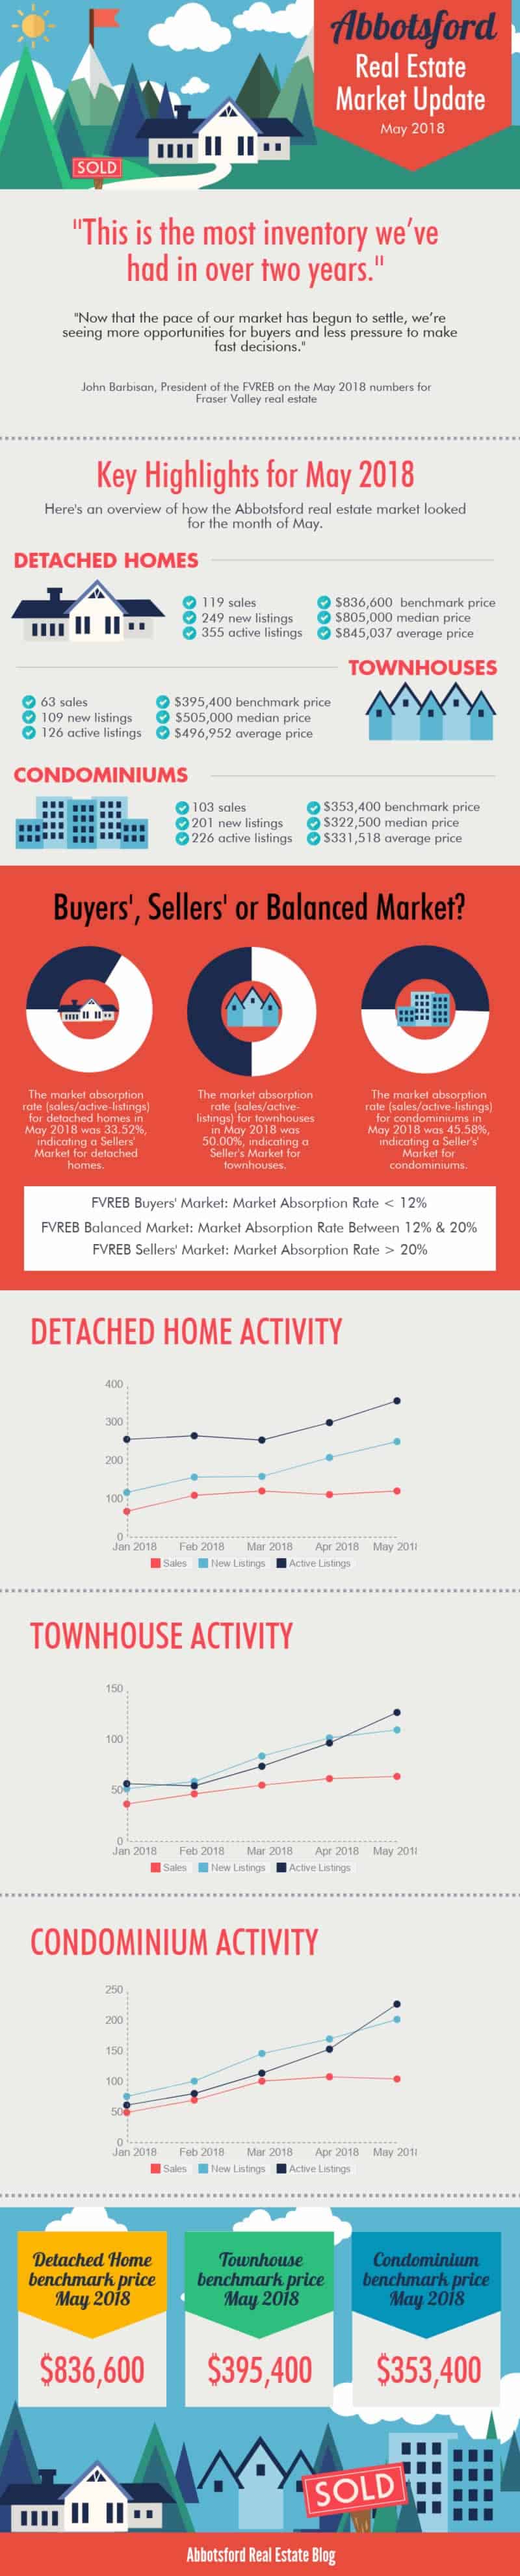 Abbotsford Detached Home Market Update May 2018 Infographic